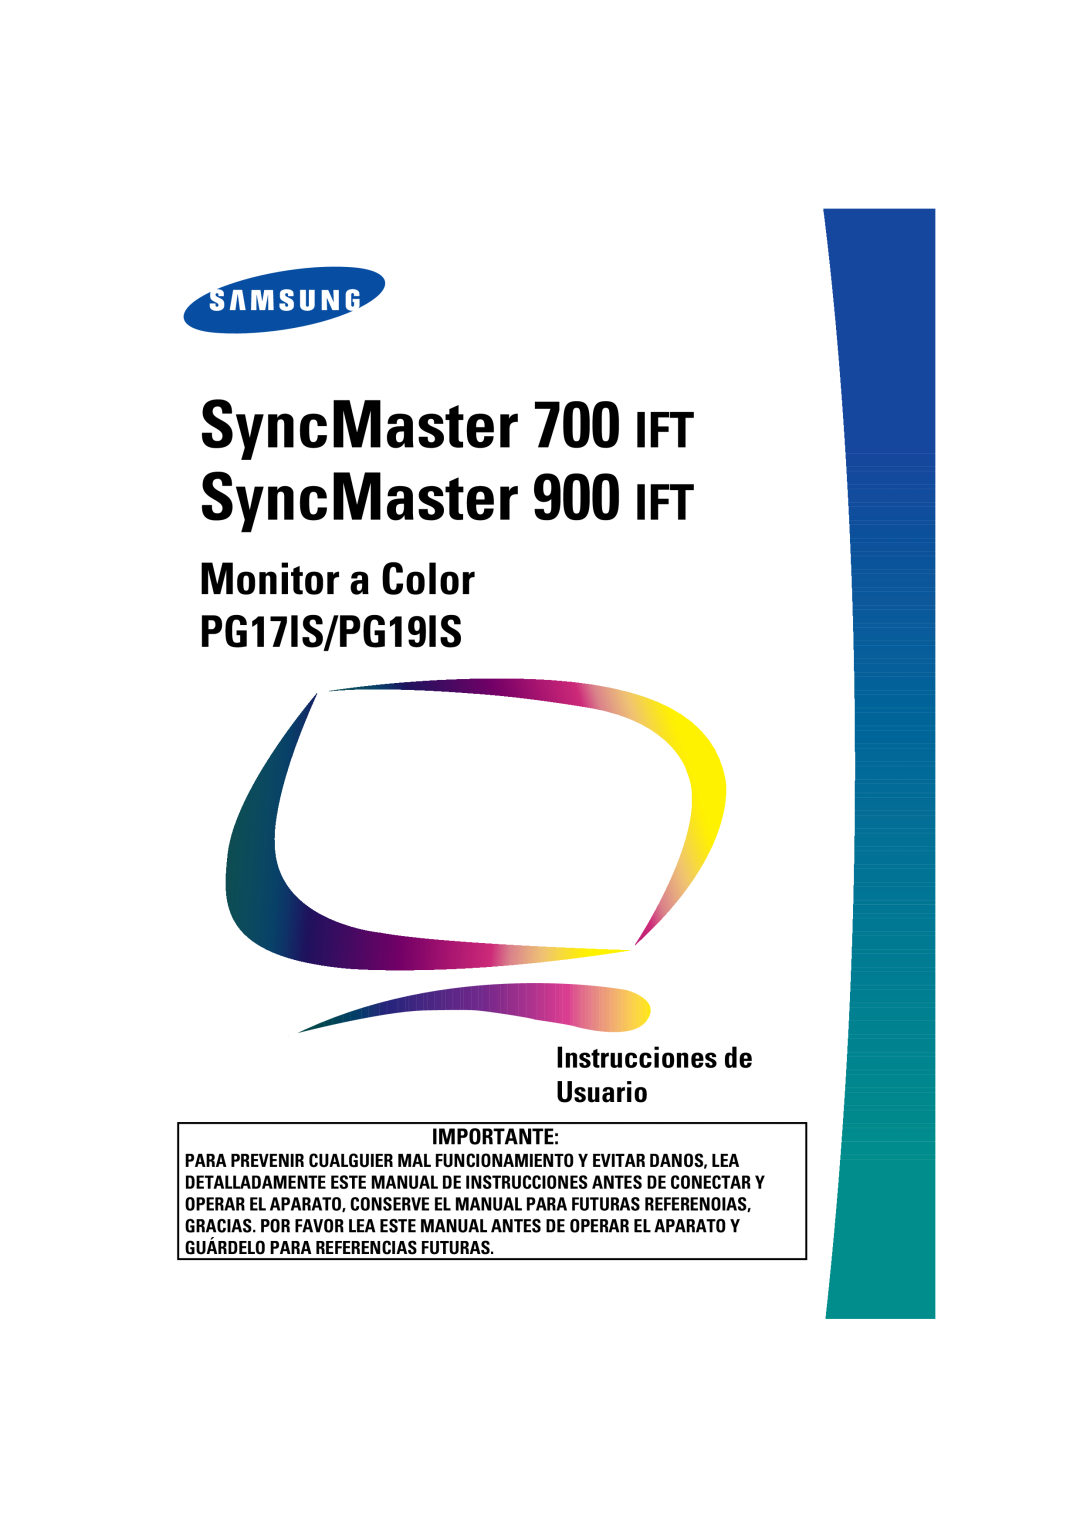 Samsung PG17IS, PG19IS manual Importante, SyncMaster 700 IFT SyncMaster 900 IFT, Monitor a Color PG17lS/PG19lS 